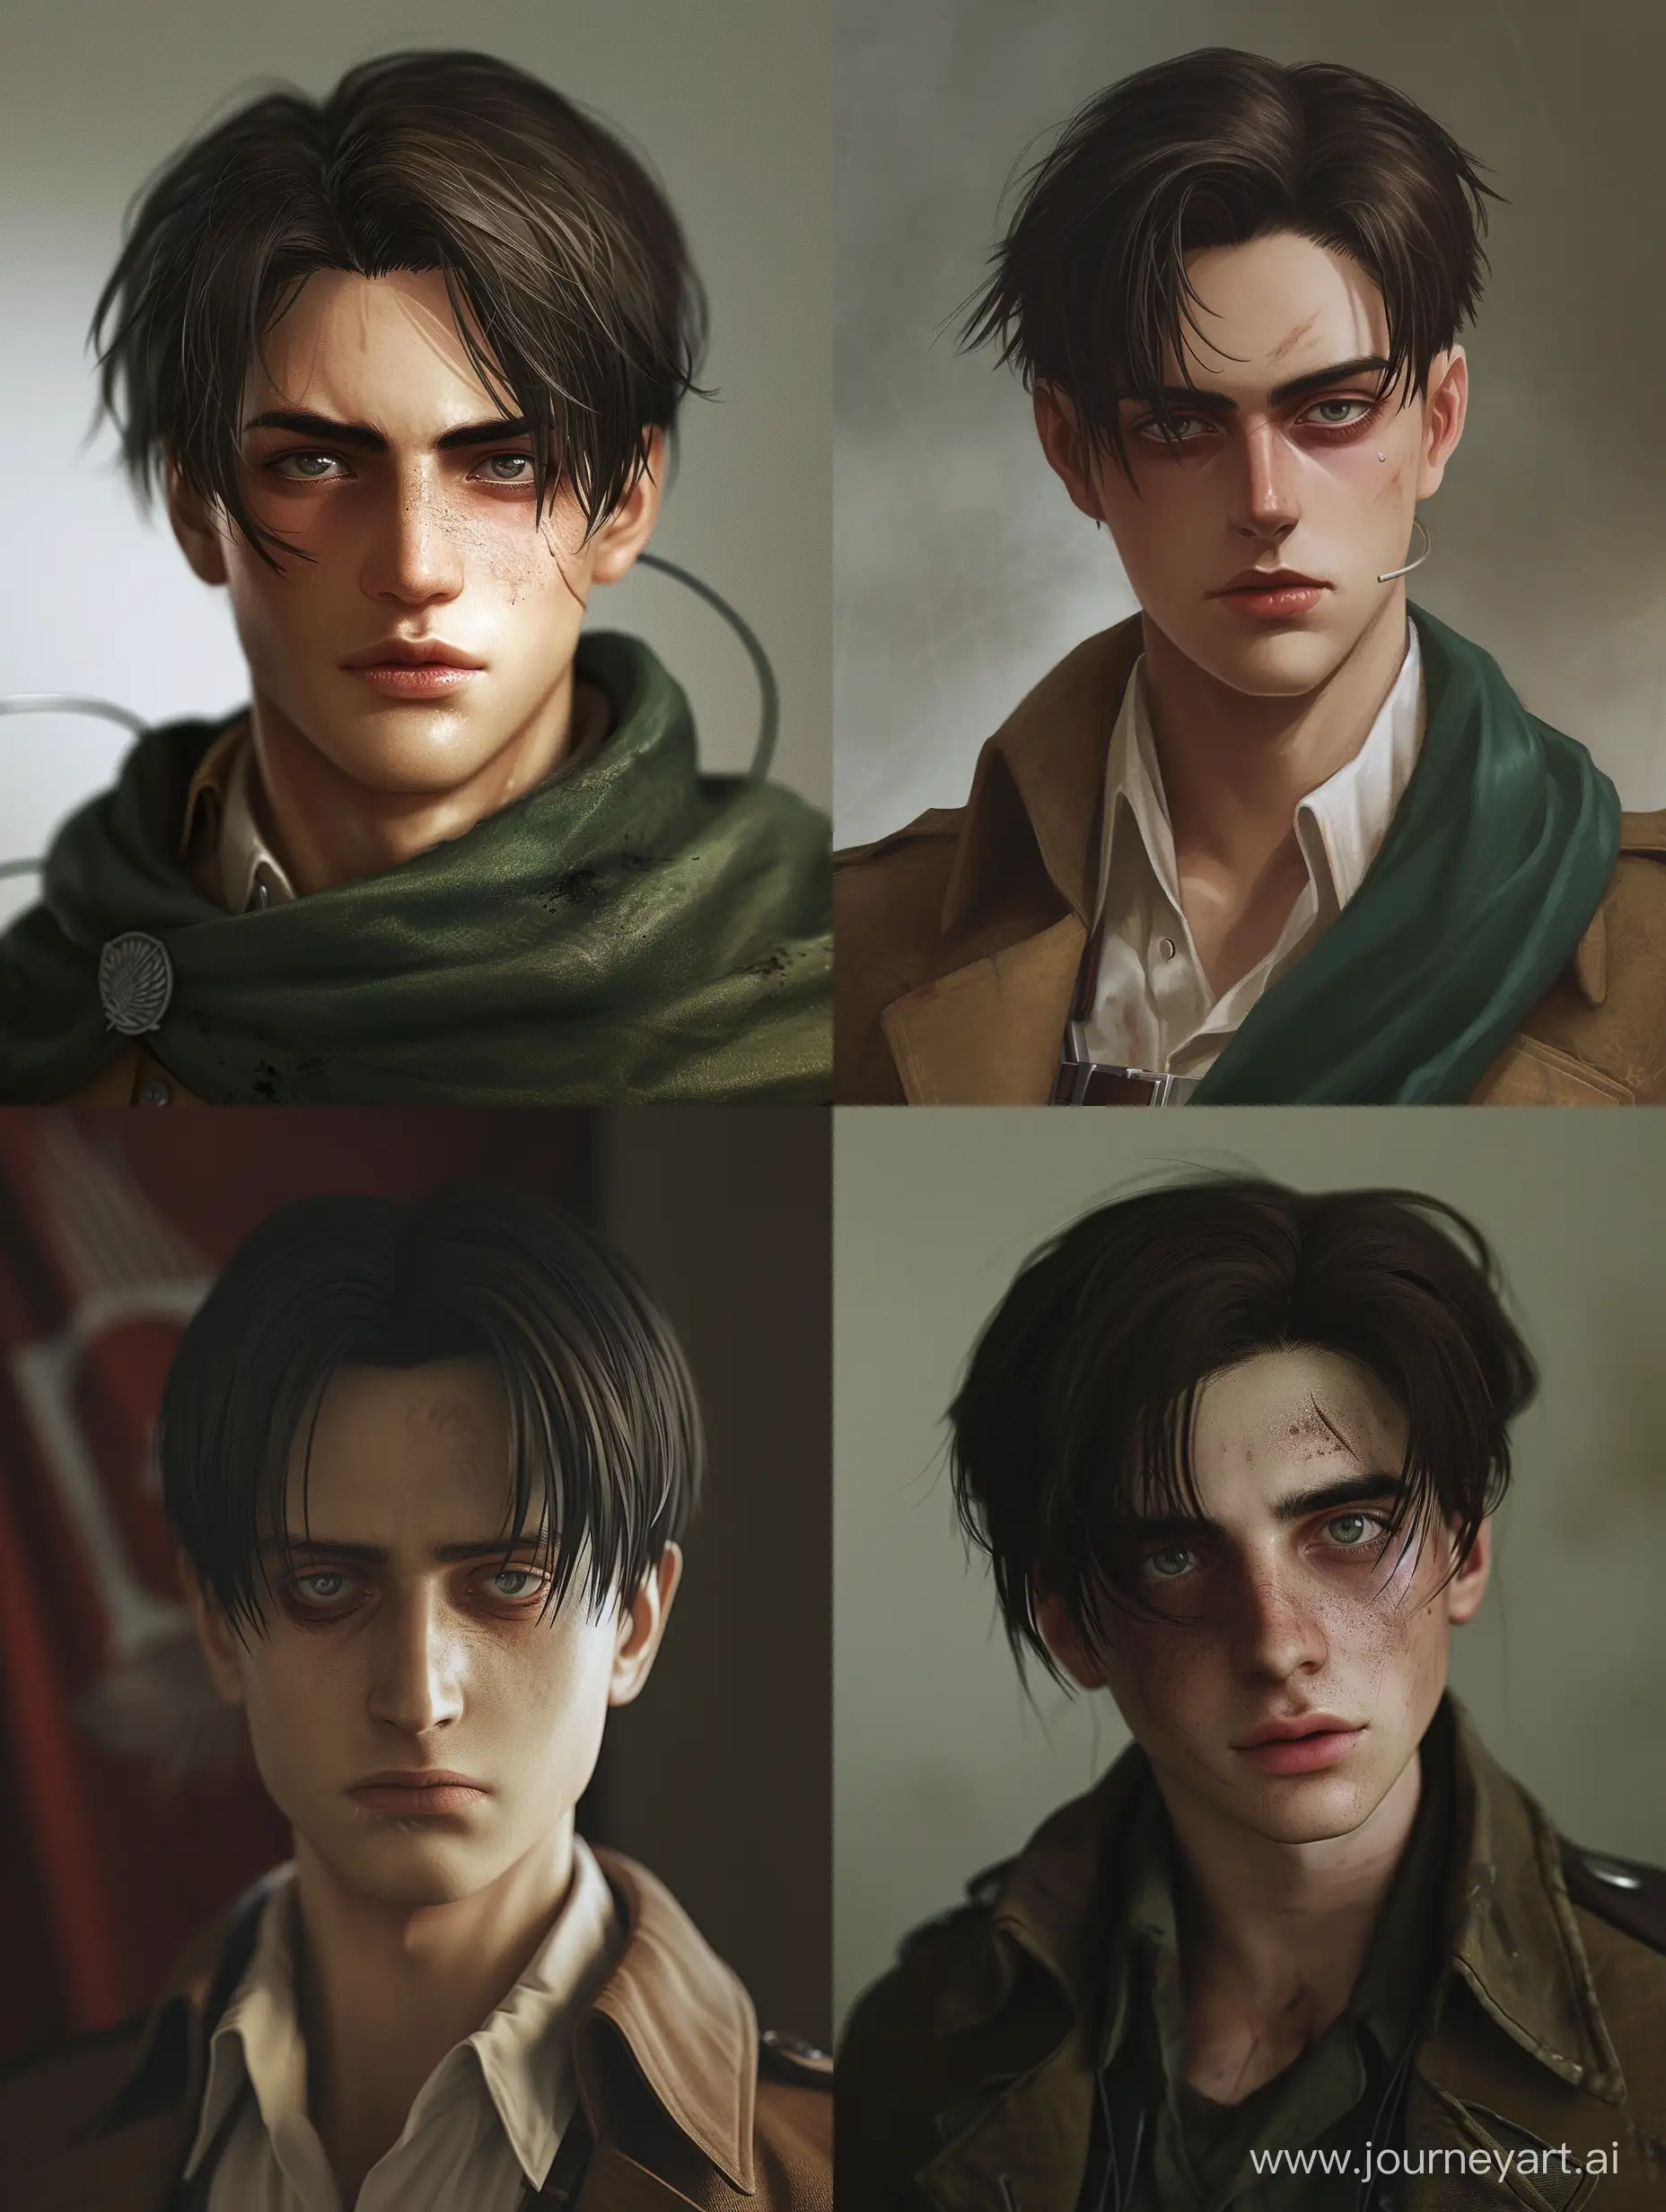 Mature-Levi-Ackerman-from-Attack-on-Titan-with-a-Sly-Smile